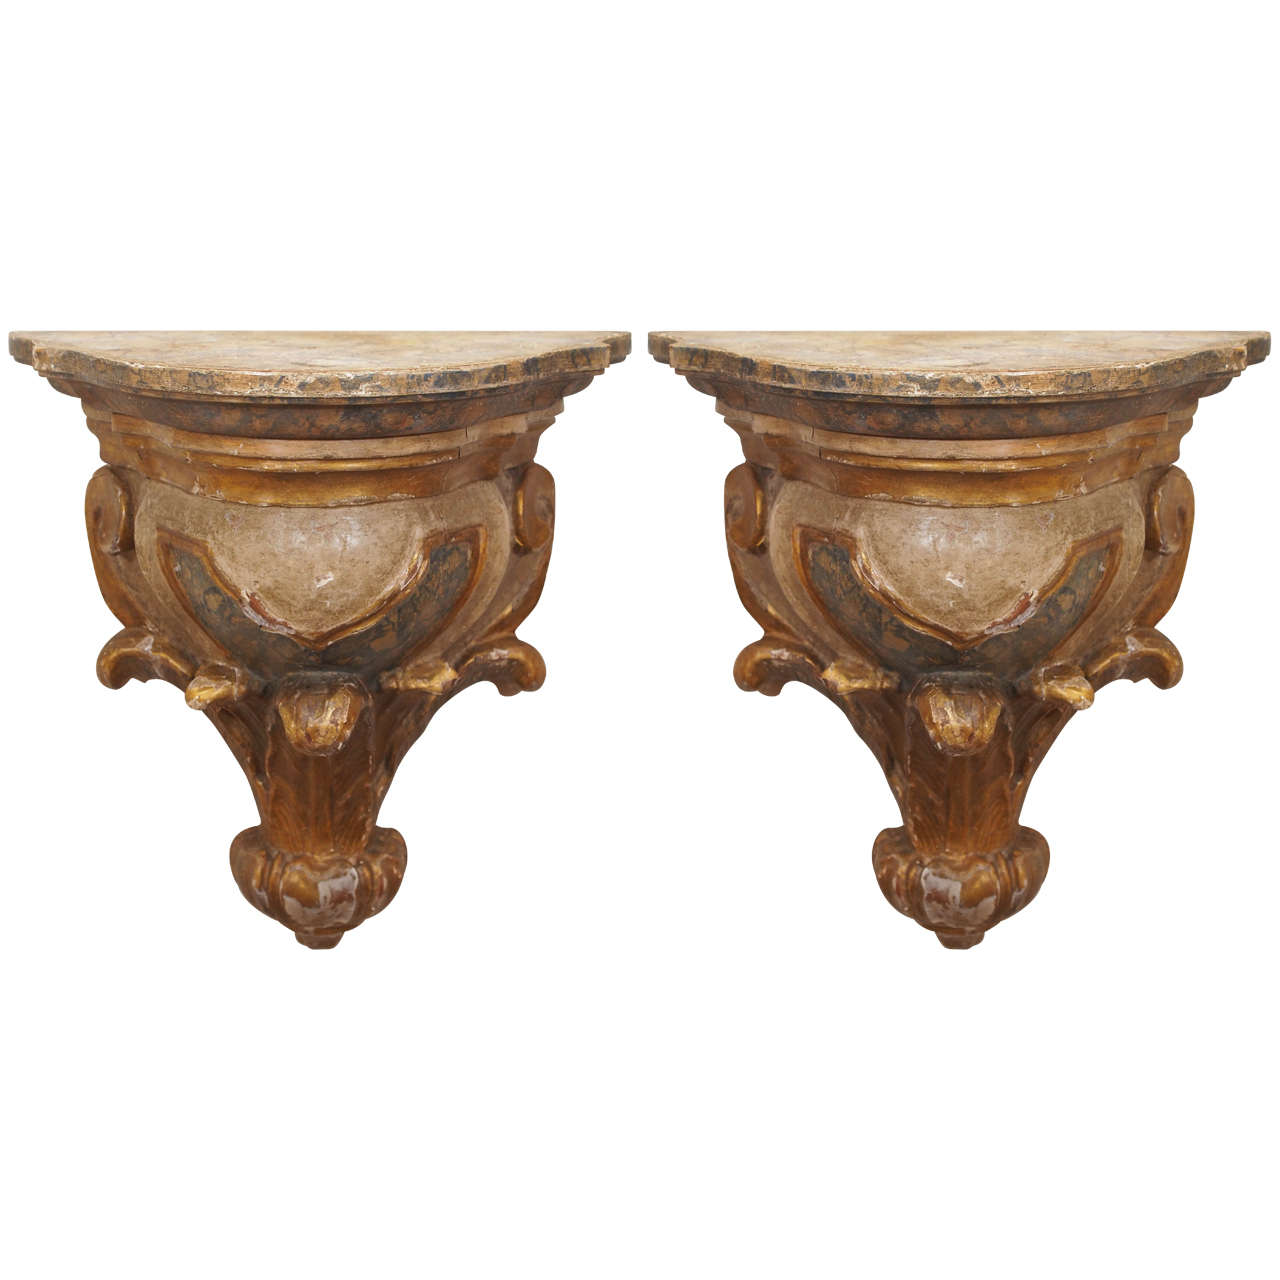 Pair of Rococo Polychrome and Gilt Wall Brackets